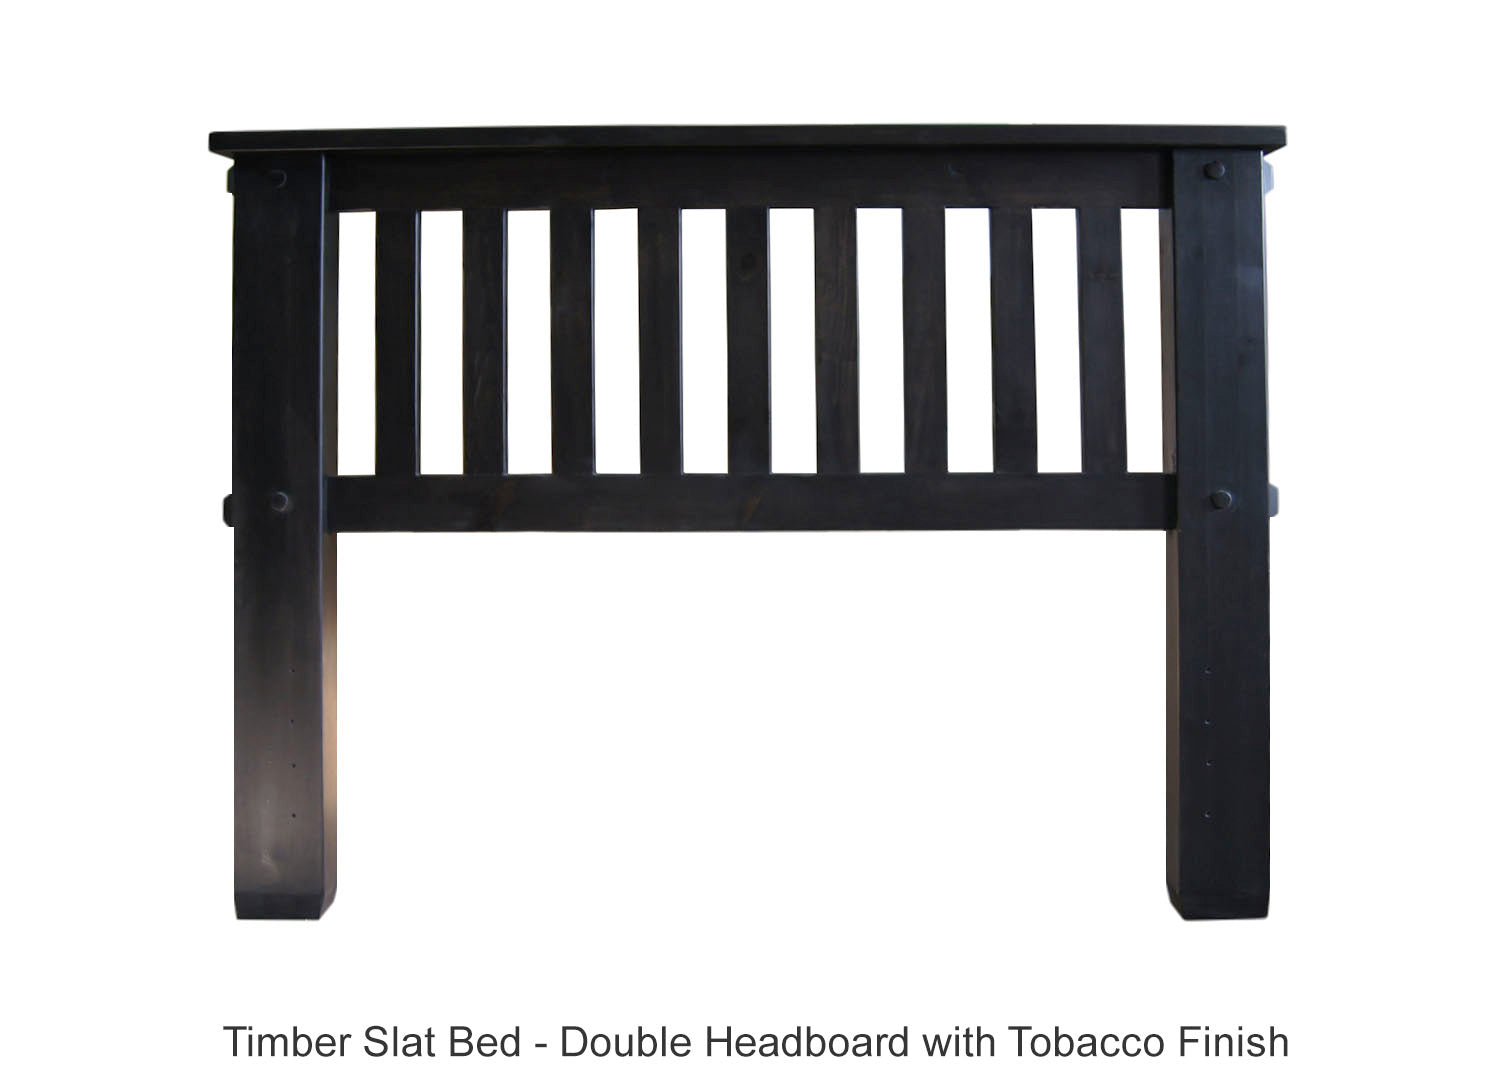 Timber Slat Bed Double Headboard with Tobacco Finish